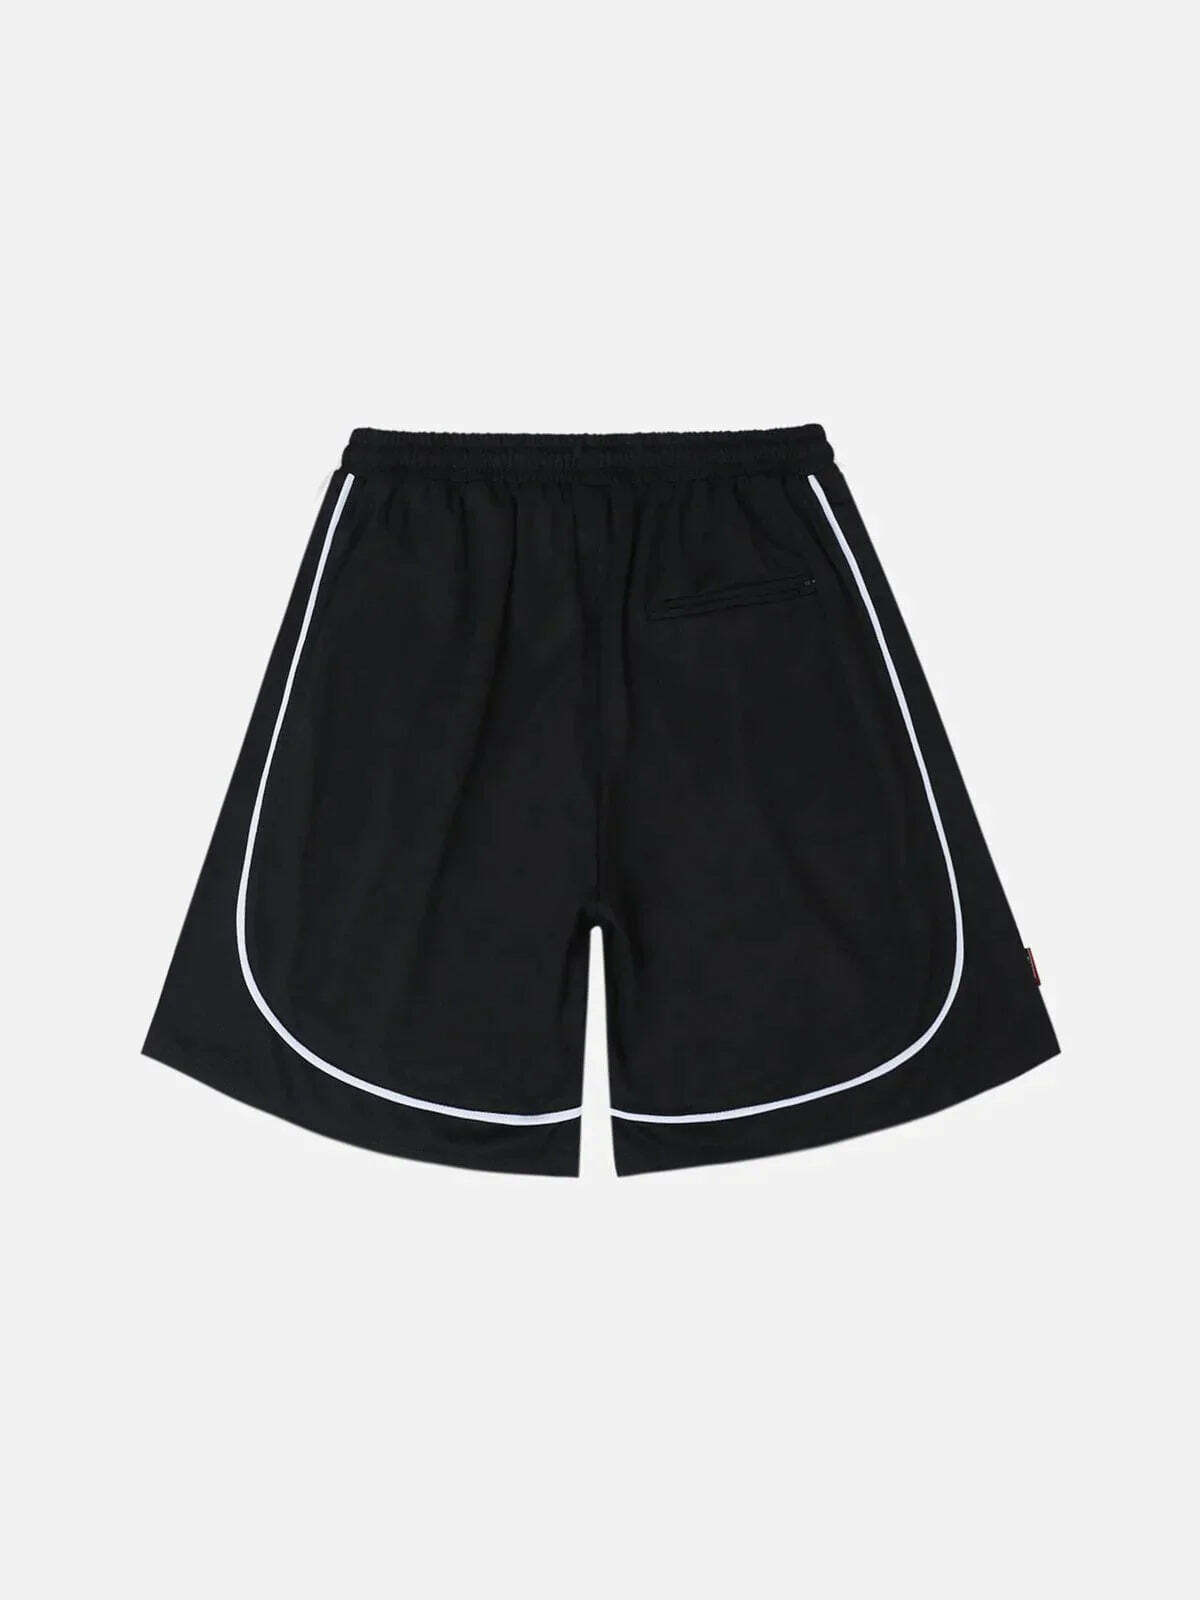 solid color classic shorts timeless style & versatile comfort 1405